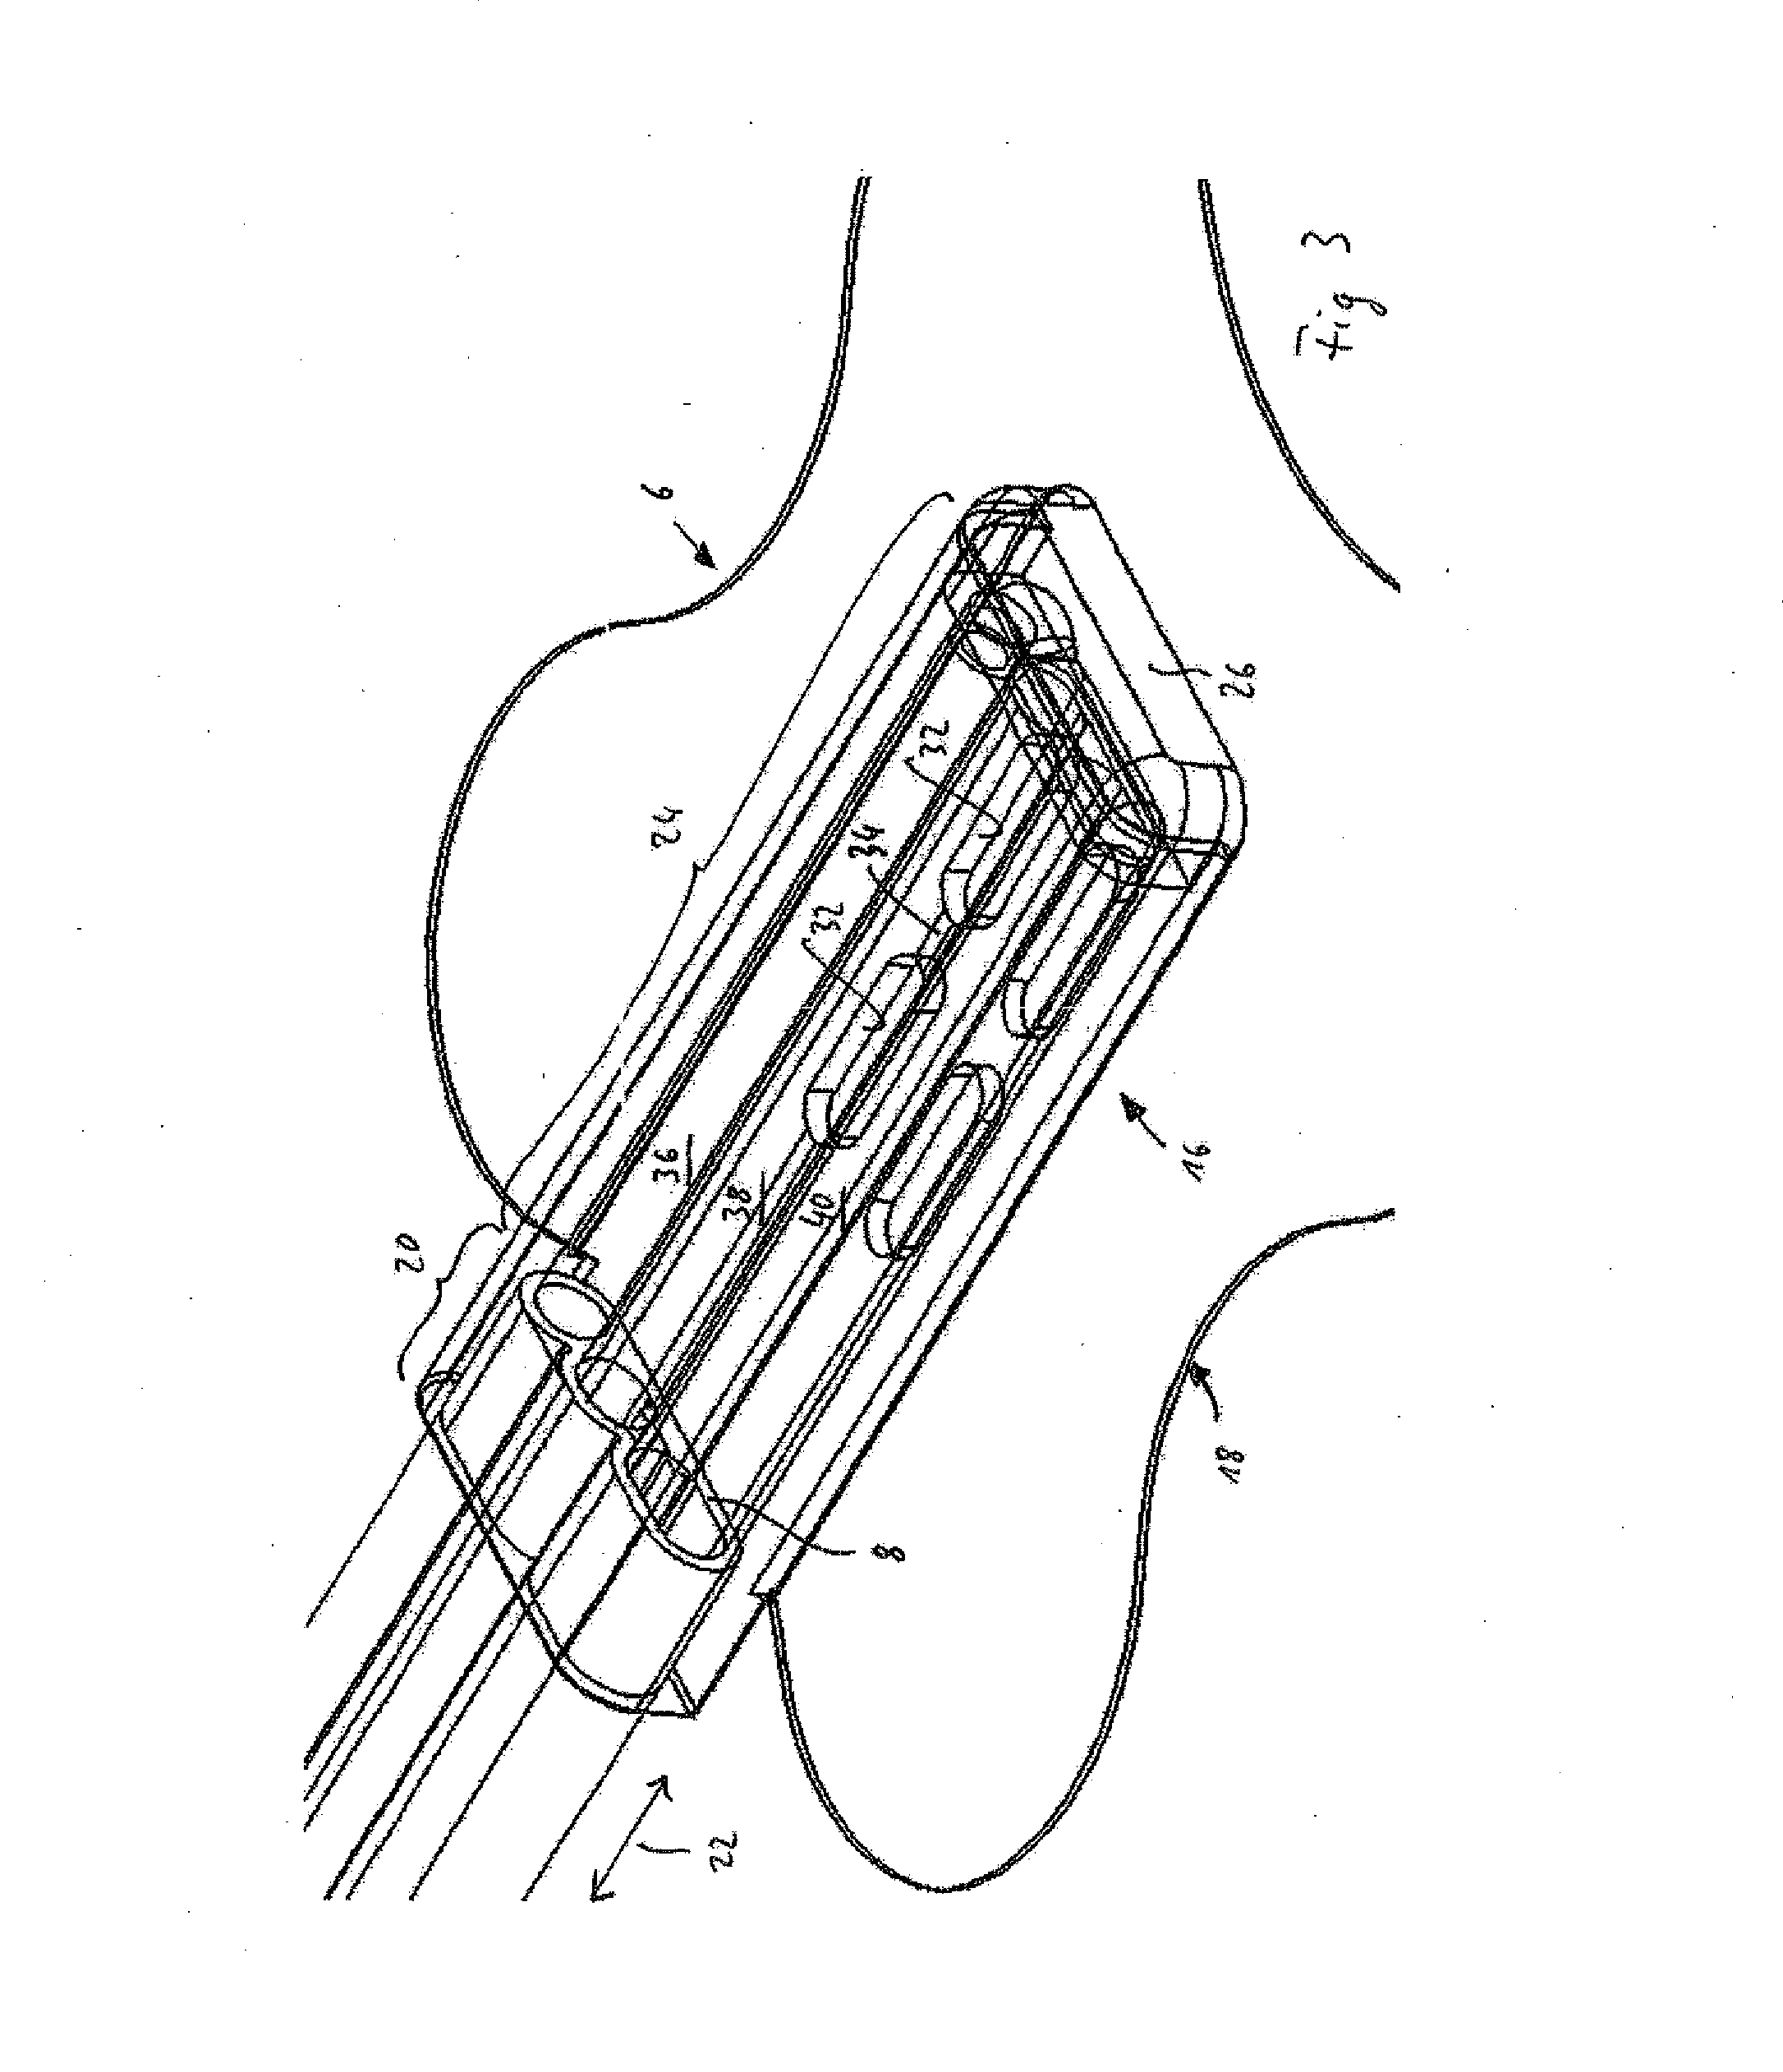 Connection device for use in the negative pressure treatment of wounds